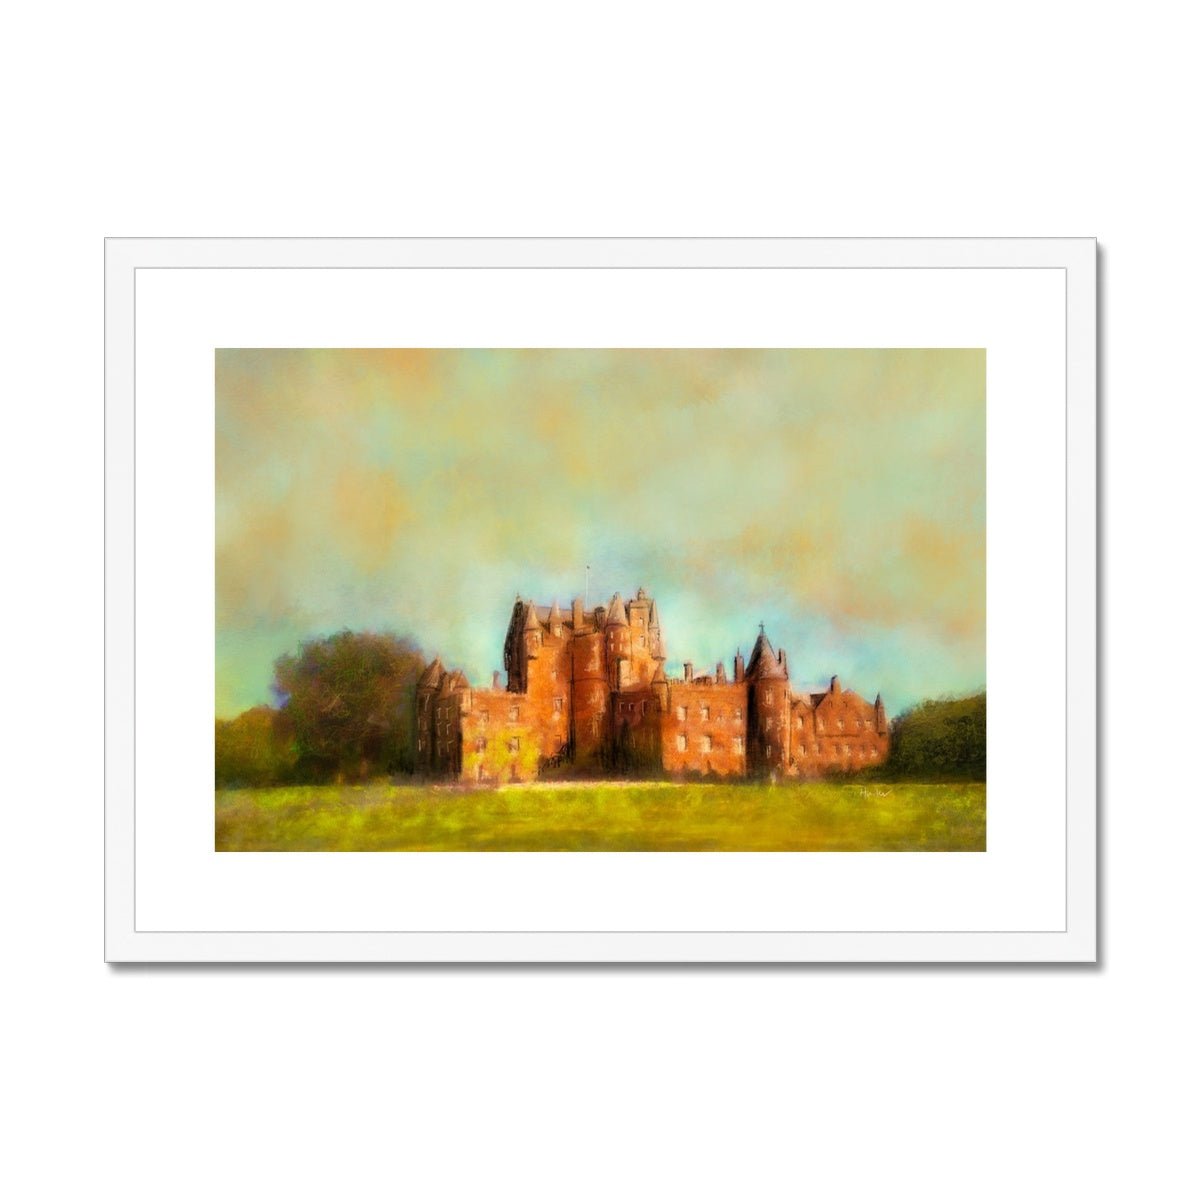 Glamis Castle Painting | Framed & Mounted Prints From Scotland-Framed & Mounted Prints-Historic & Iconic Scotland Art Gallery-A2 Landscape-White Frame-Paintings, Prints, Homeware, Art Gifts From Scotland By Scottish Artist Kevin Hunter